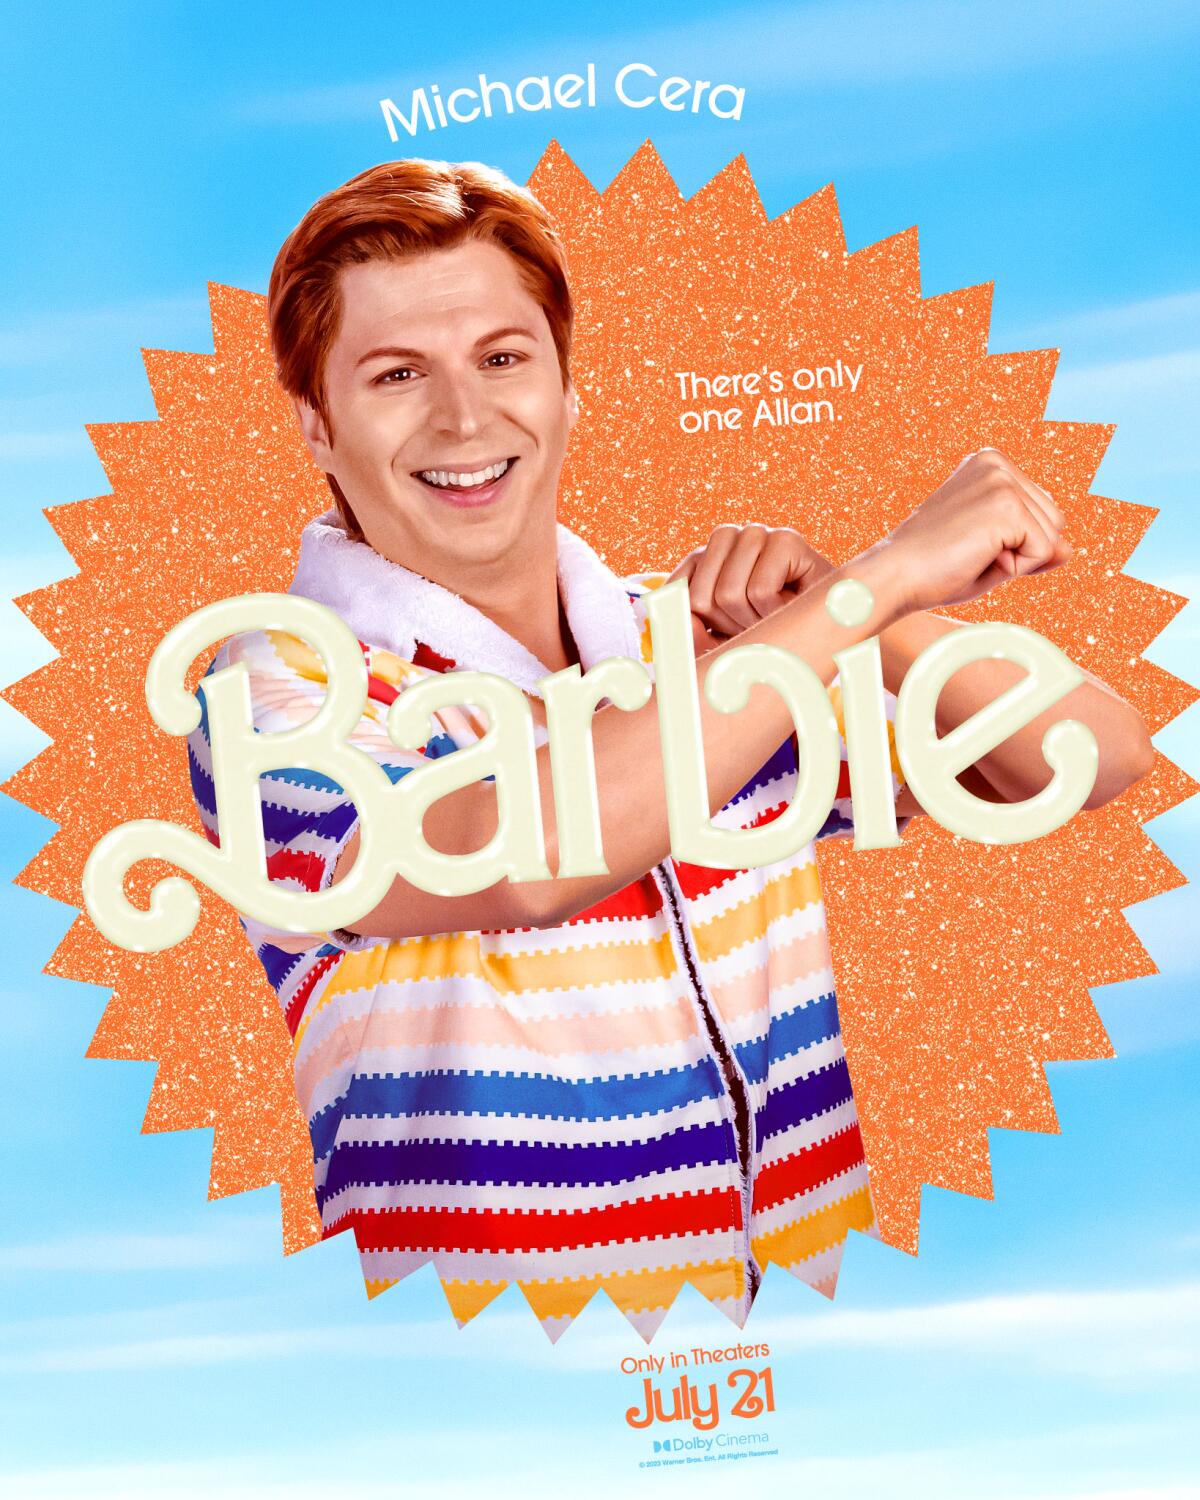 Michael Cera smiles and lightly crosses his arms in a "Barbie" movie poster. He wears a colorful striped shirt.